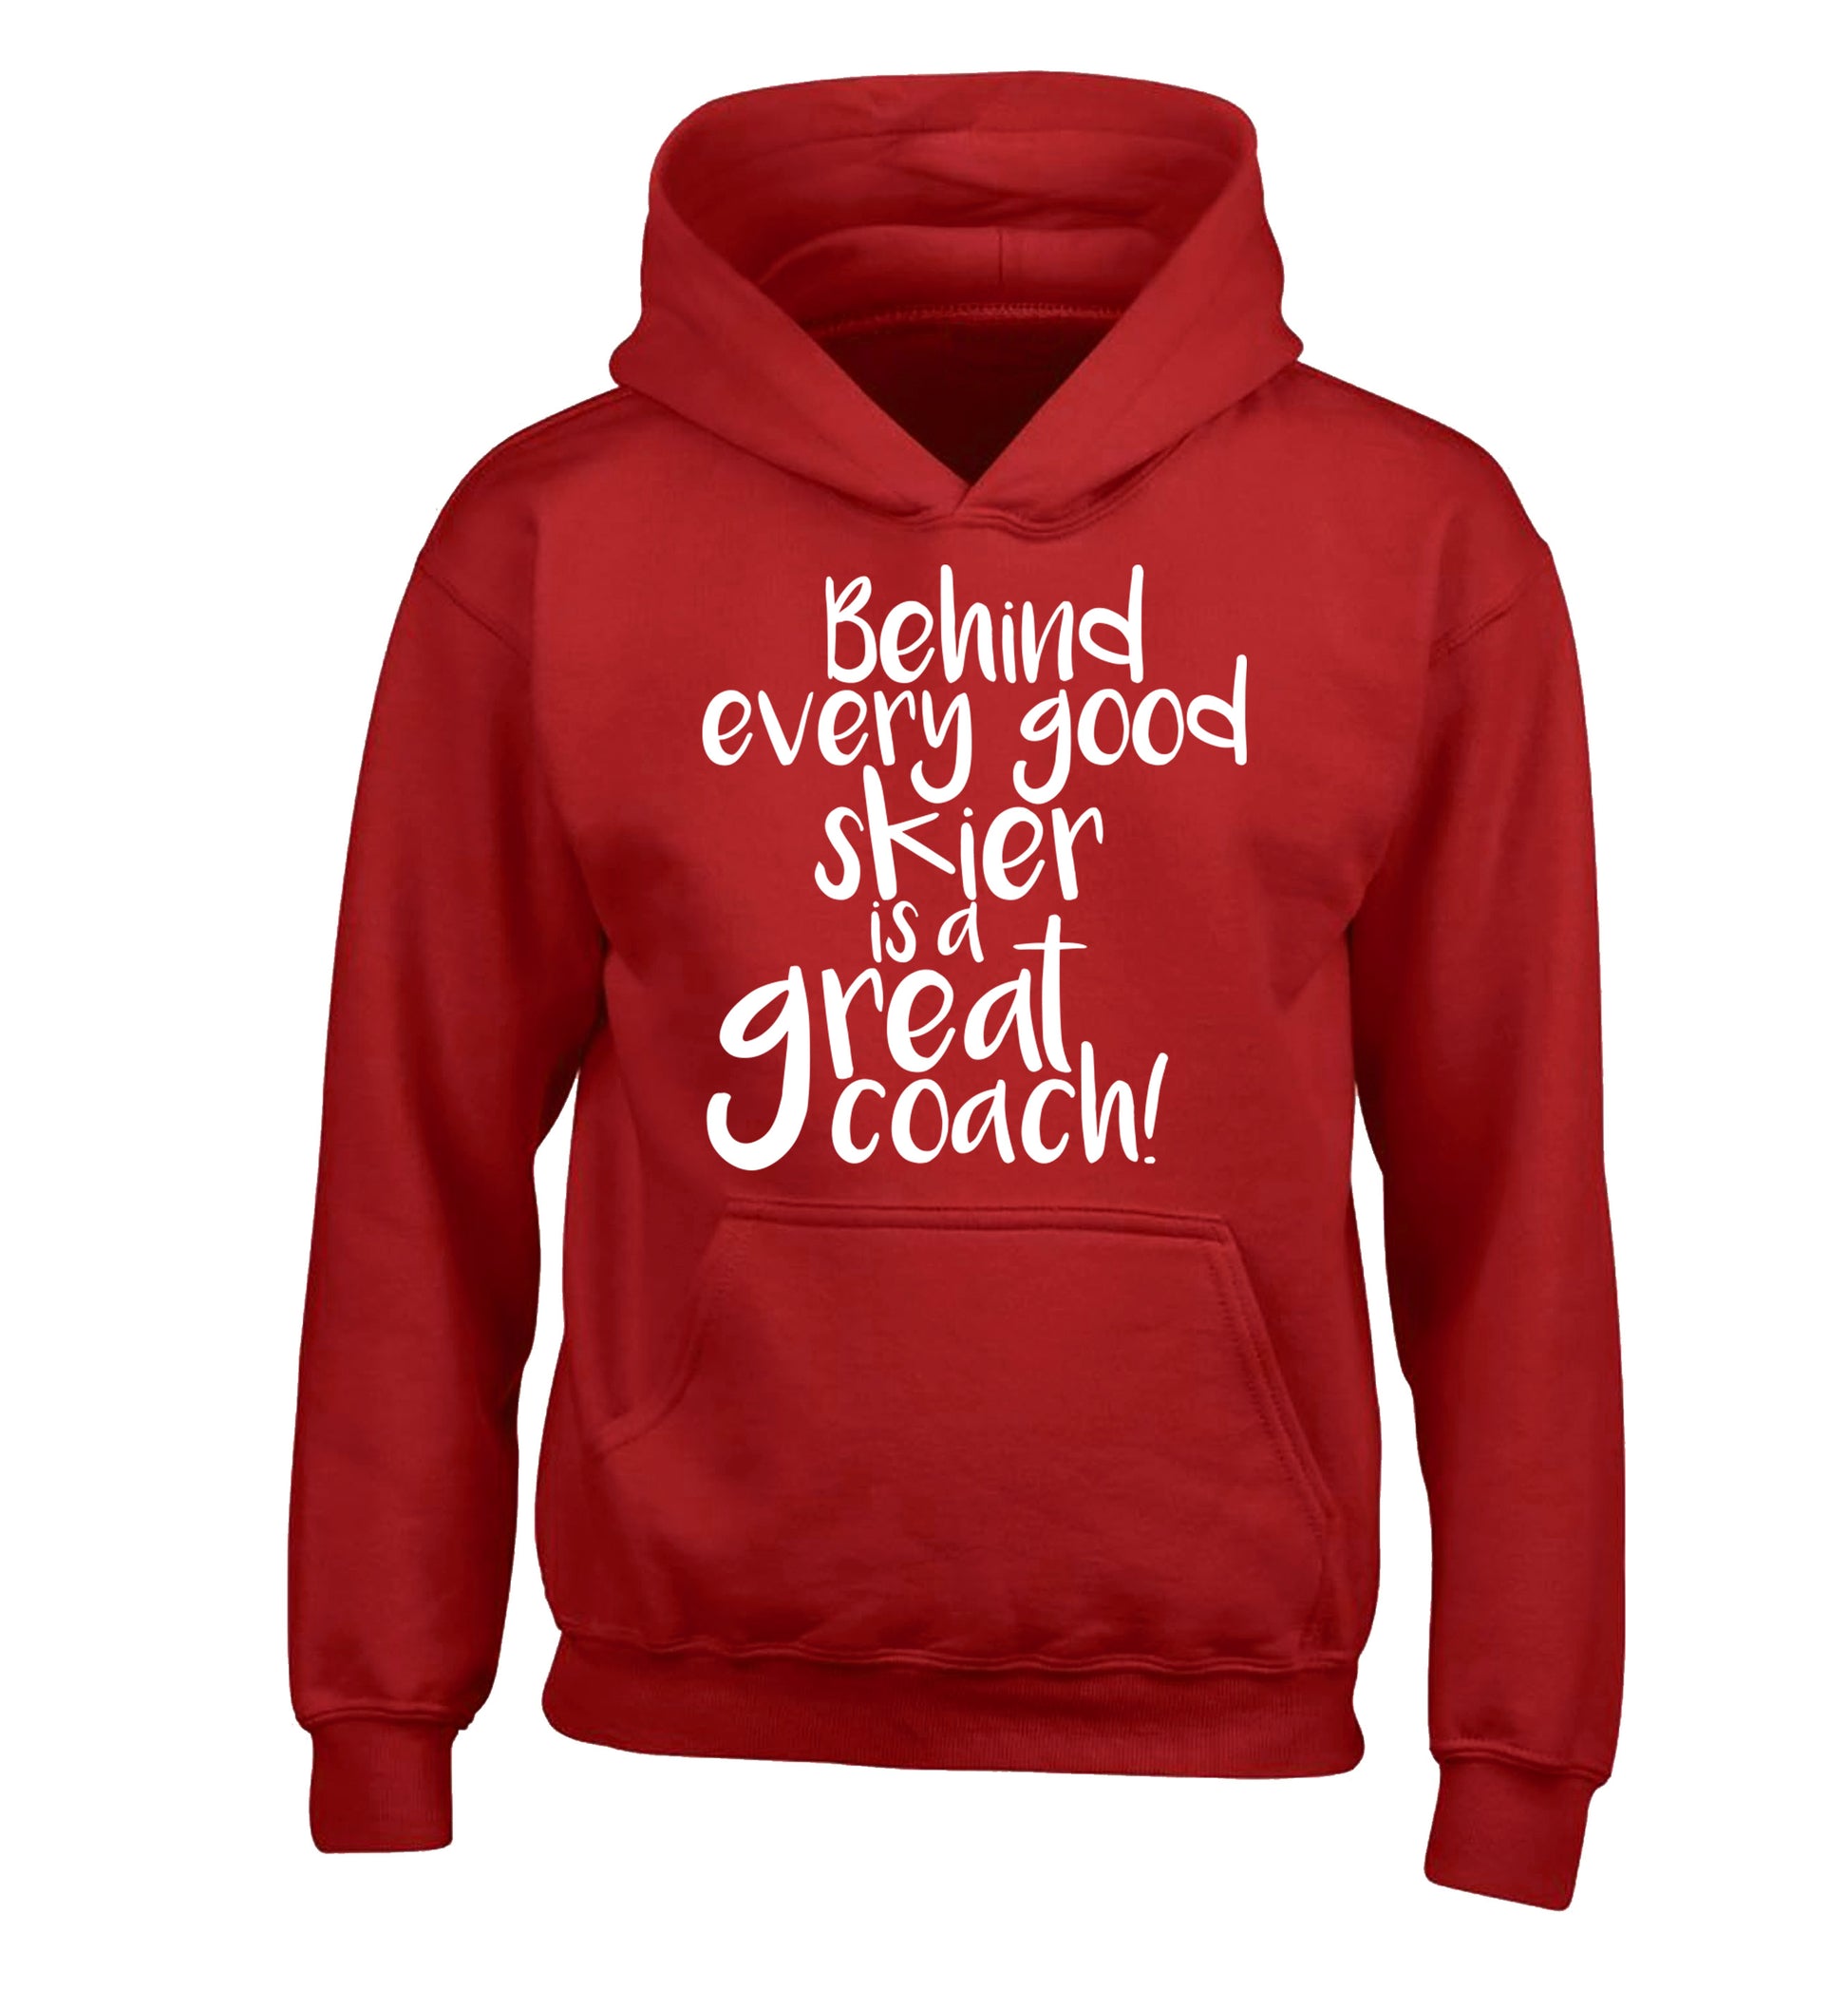 Behind every good skier is a great coach! children's red hoodie 12-14 Years